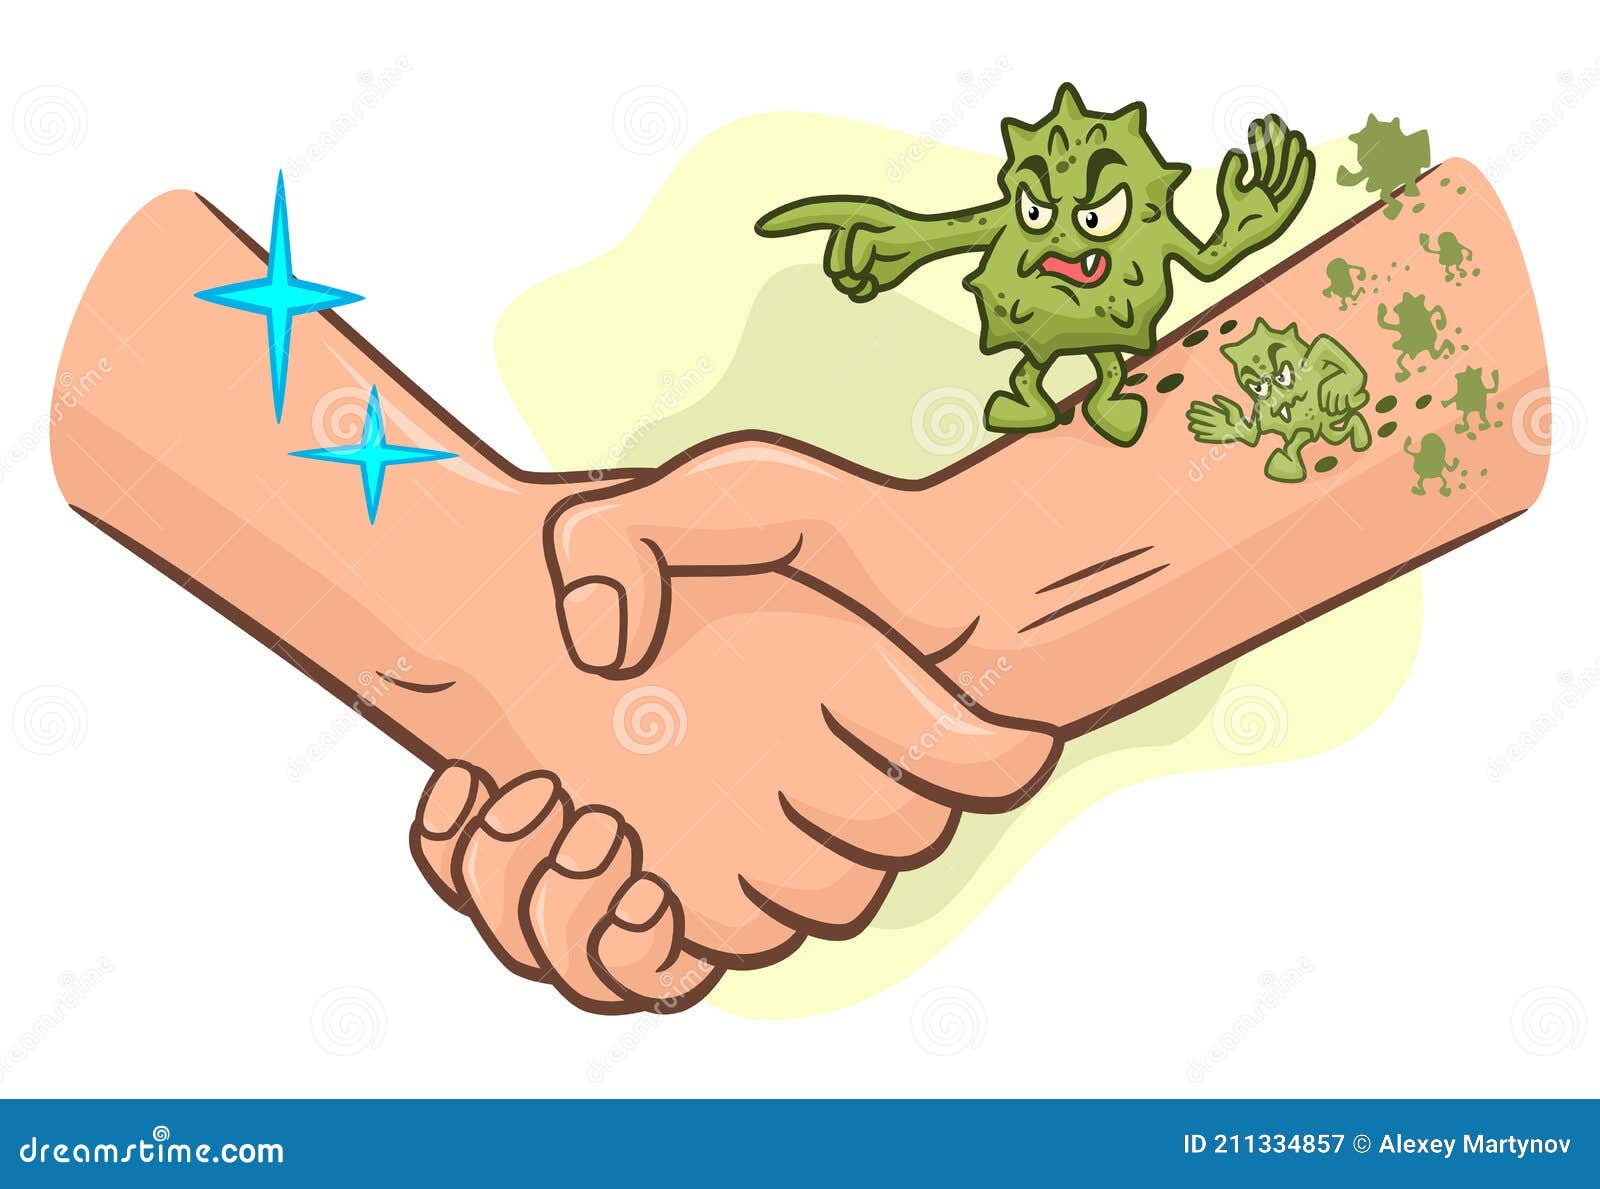 Cartoon Microbes on the Hands Stock Vector - Illustration of cartoon,  microbes: 211334857